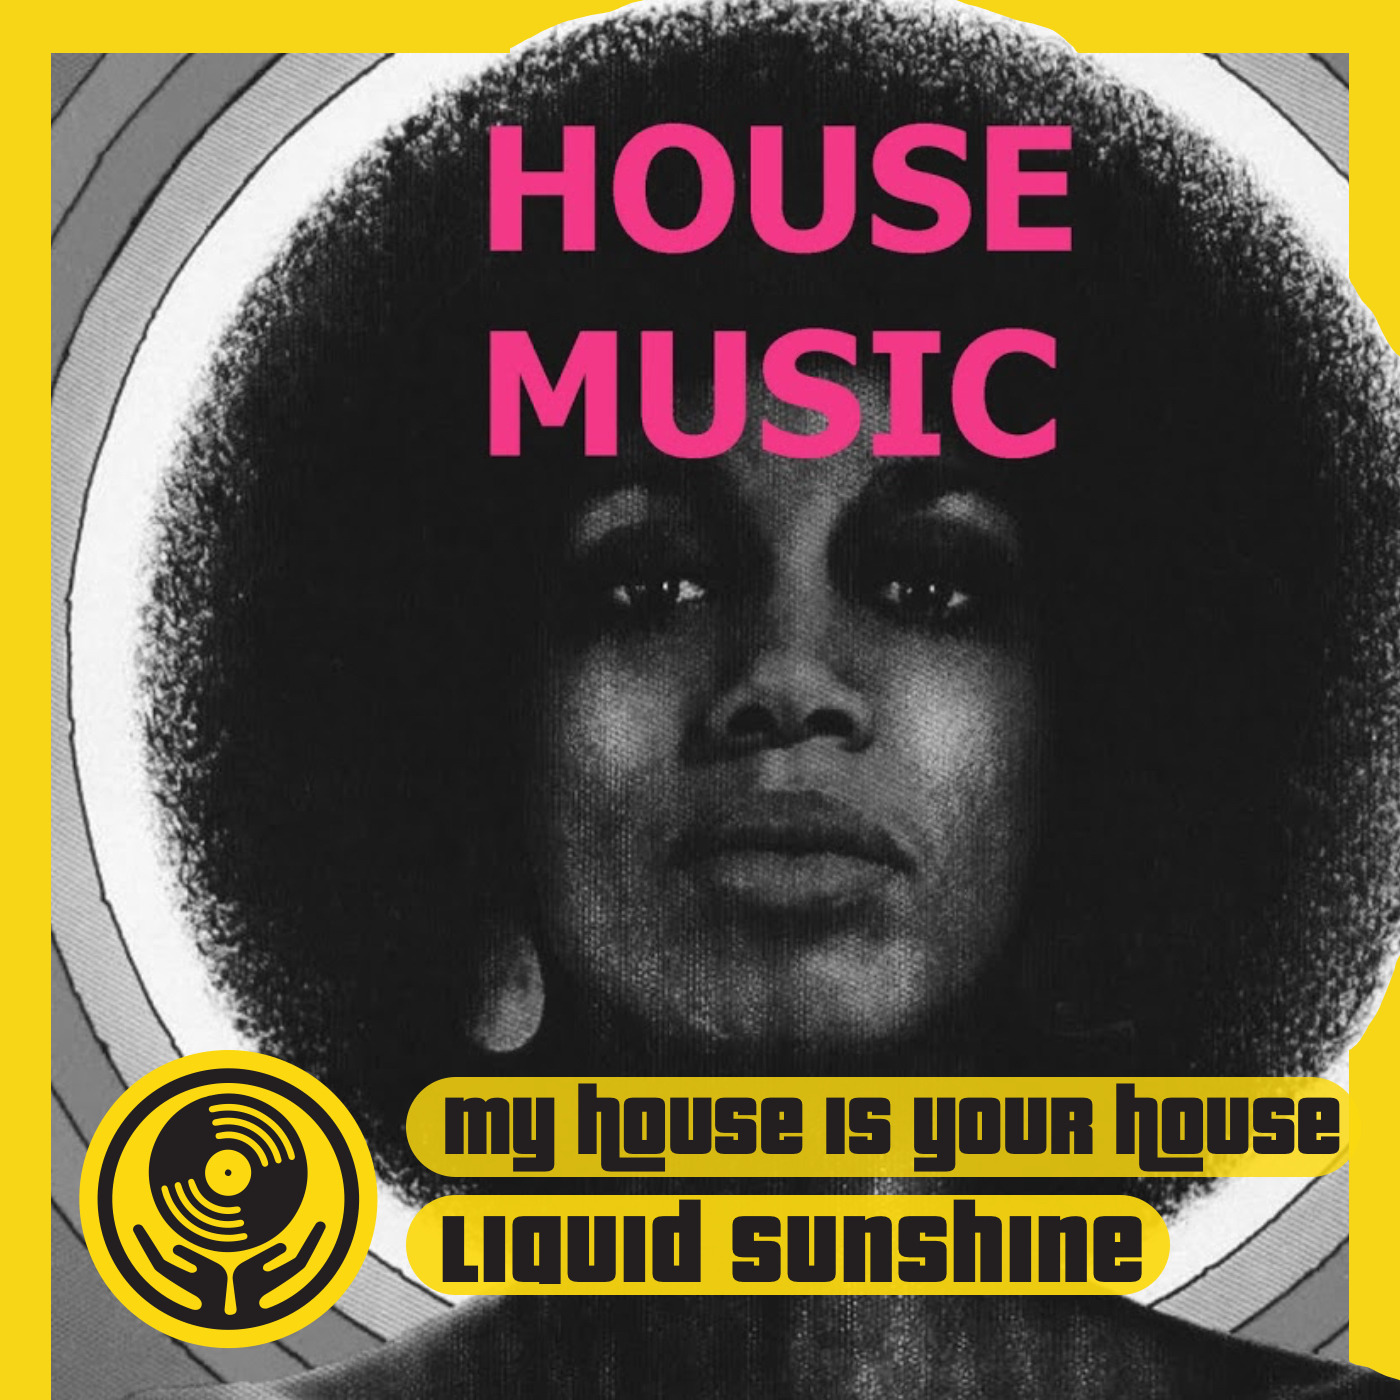 My House is Your House - Sunset to Sunrise House Trip - Part 1 of 4 - Liquid Sunshine @ The Face Radio - 21-06-2022